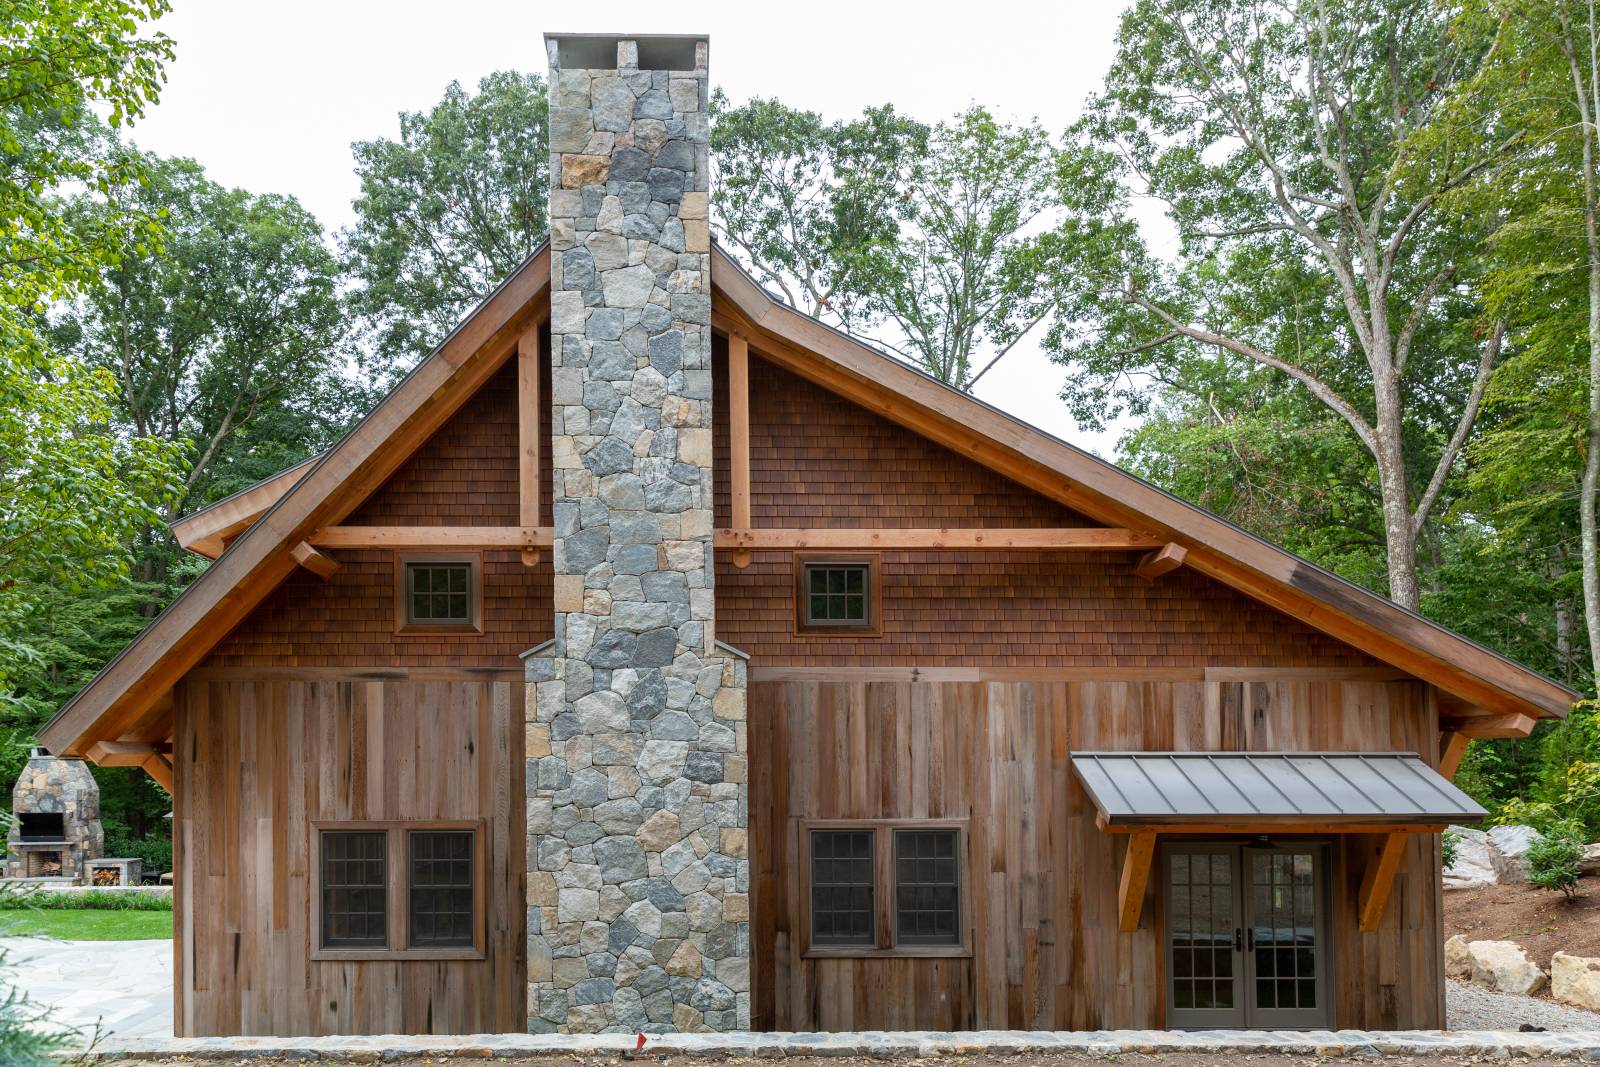 Gable View • Stone Chimney • Reclaimed Barn Board Siding • Cedar Shakes • Timber Frame Accents